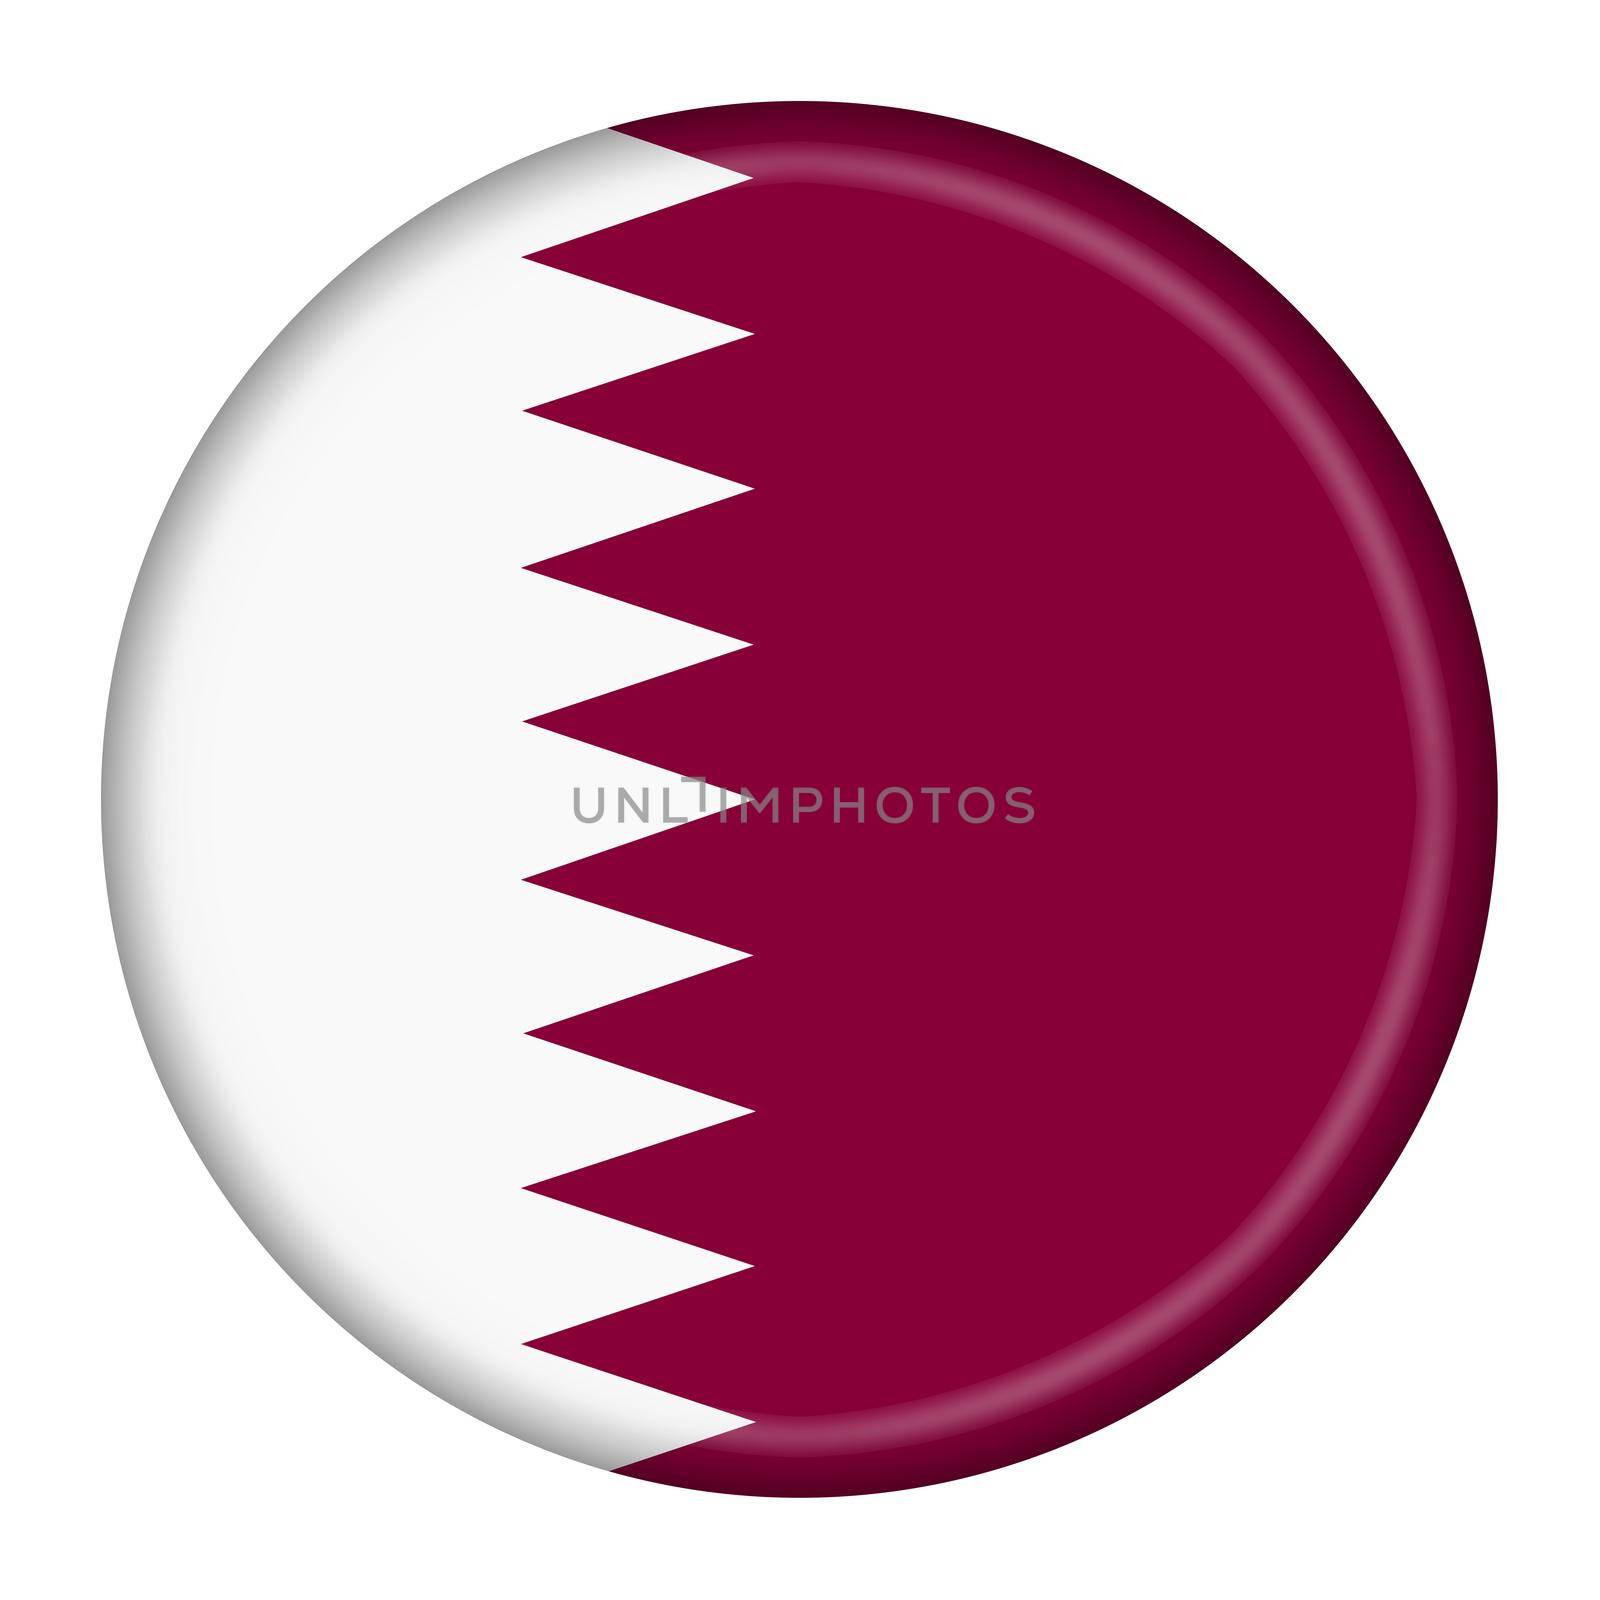 A Qatar flag button 3d illustration with clipping path